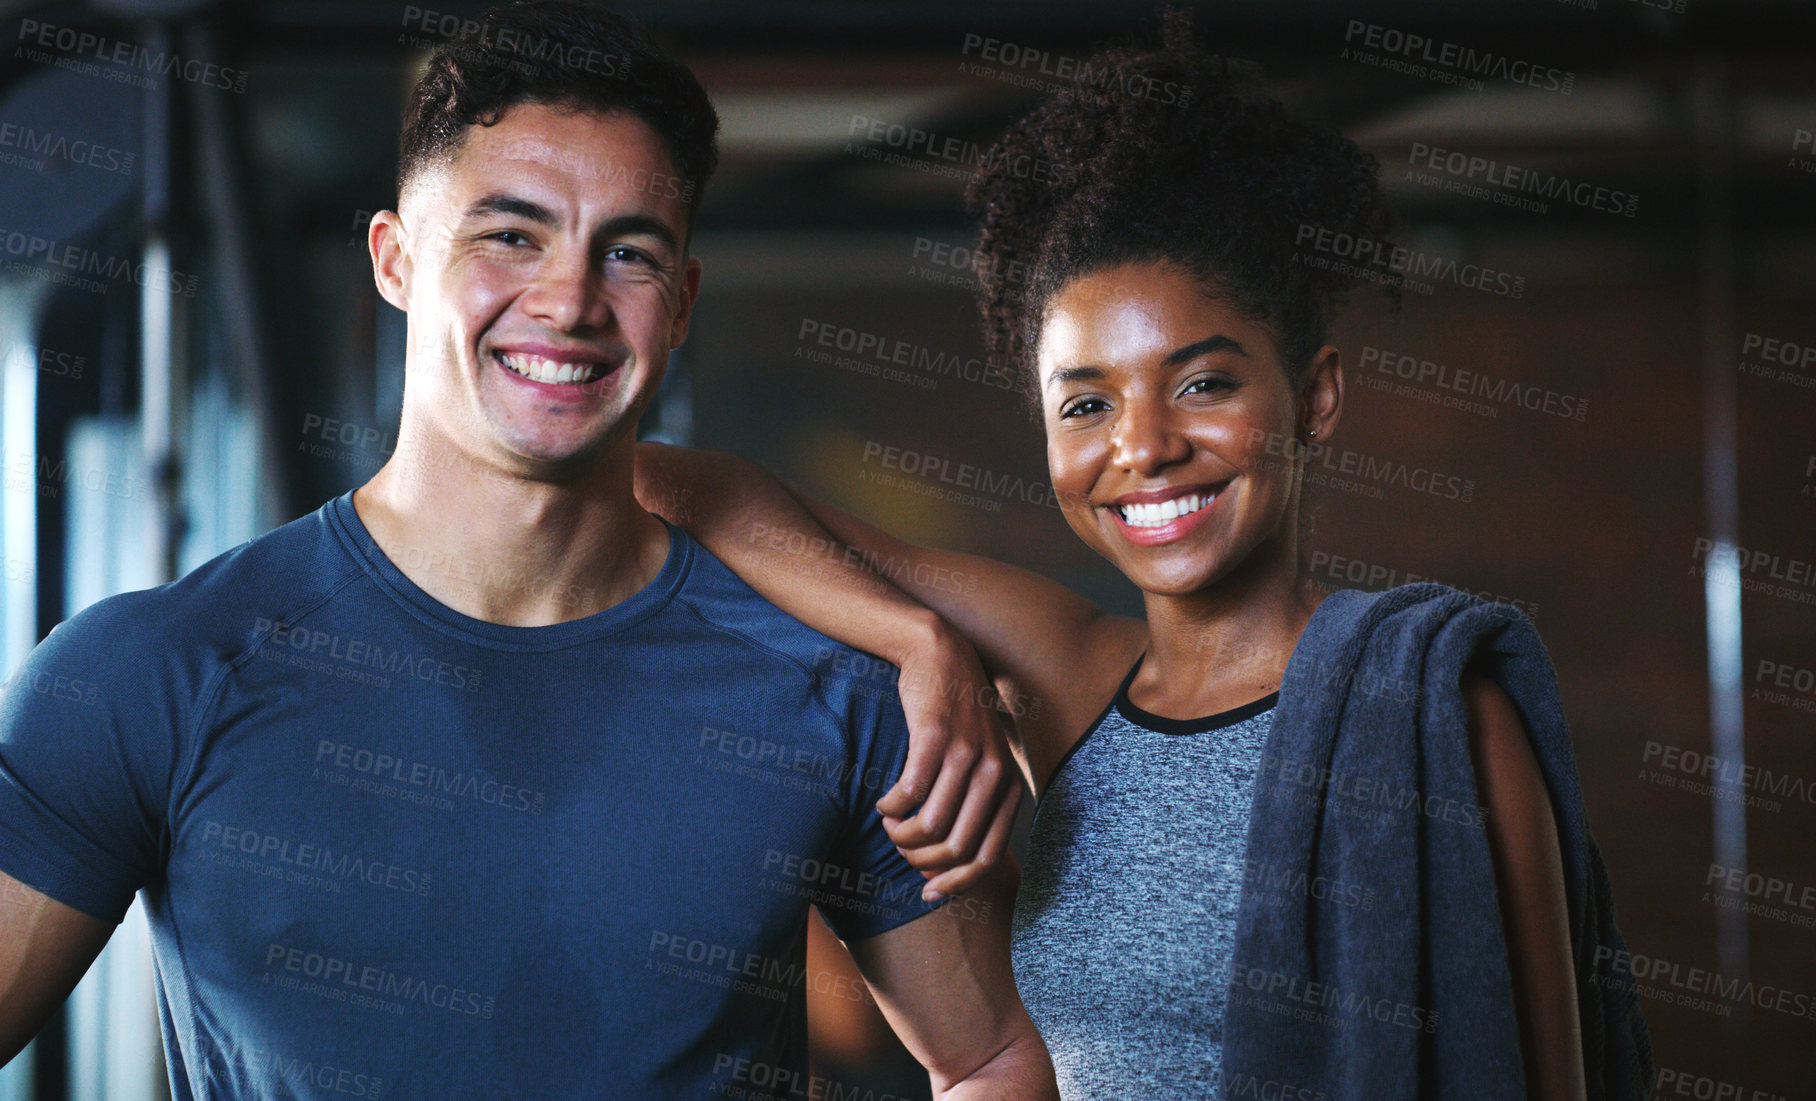 Buy stock photo Portrait of two sporty young people at the gym